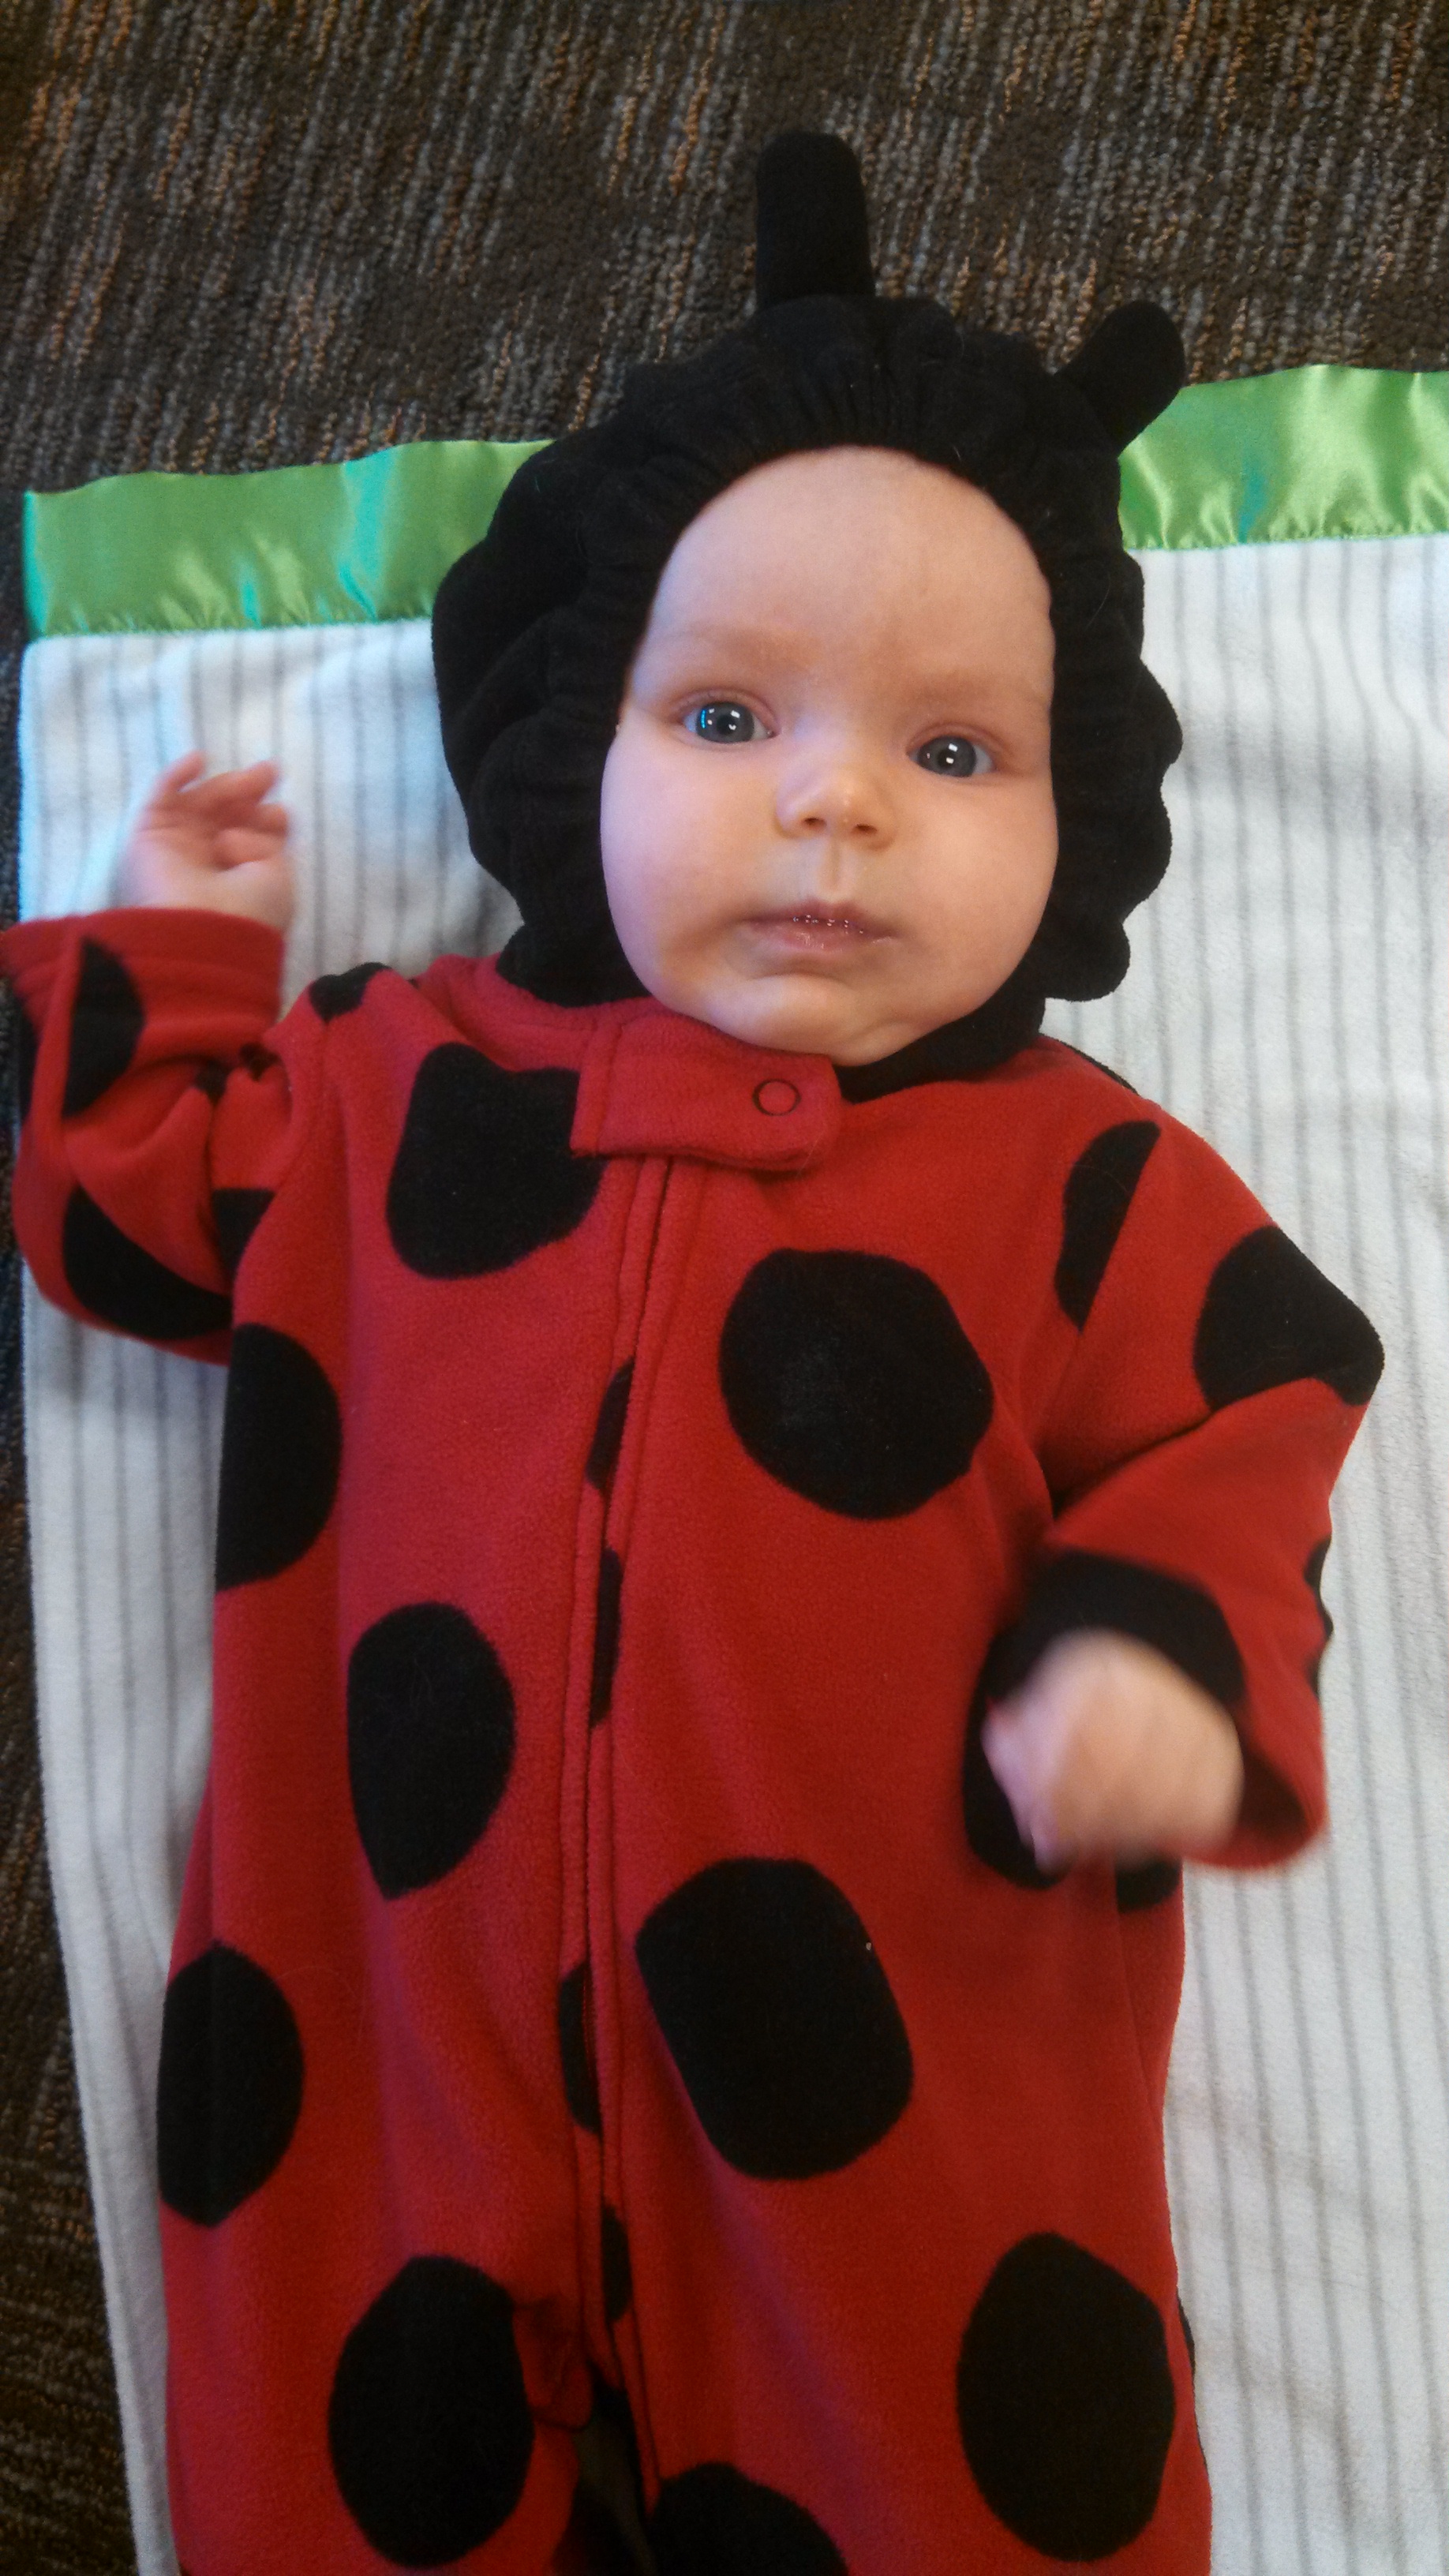 I quickly got over my hangups when I saw how insanely cute she was as a ladybug.